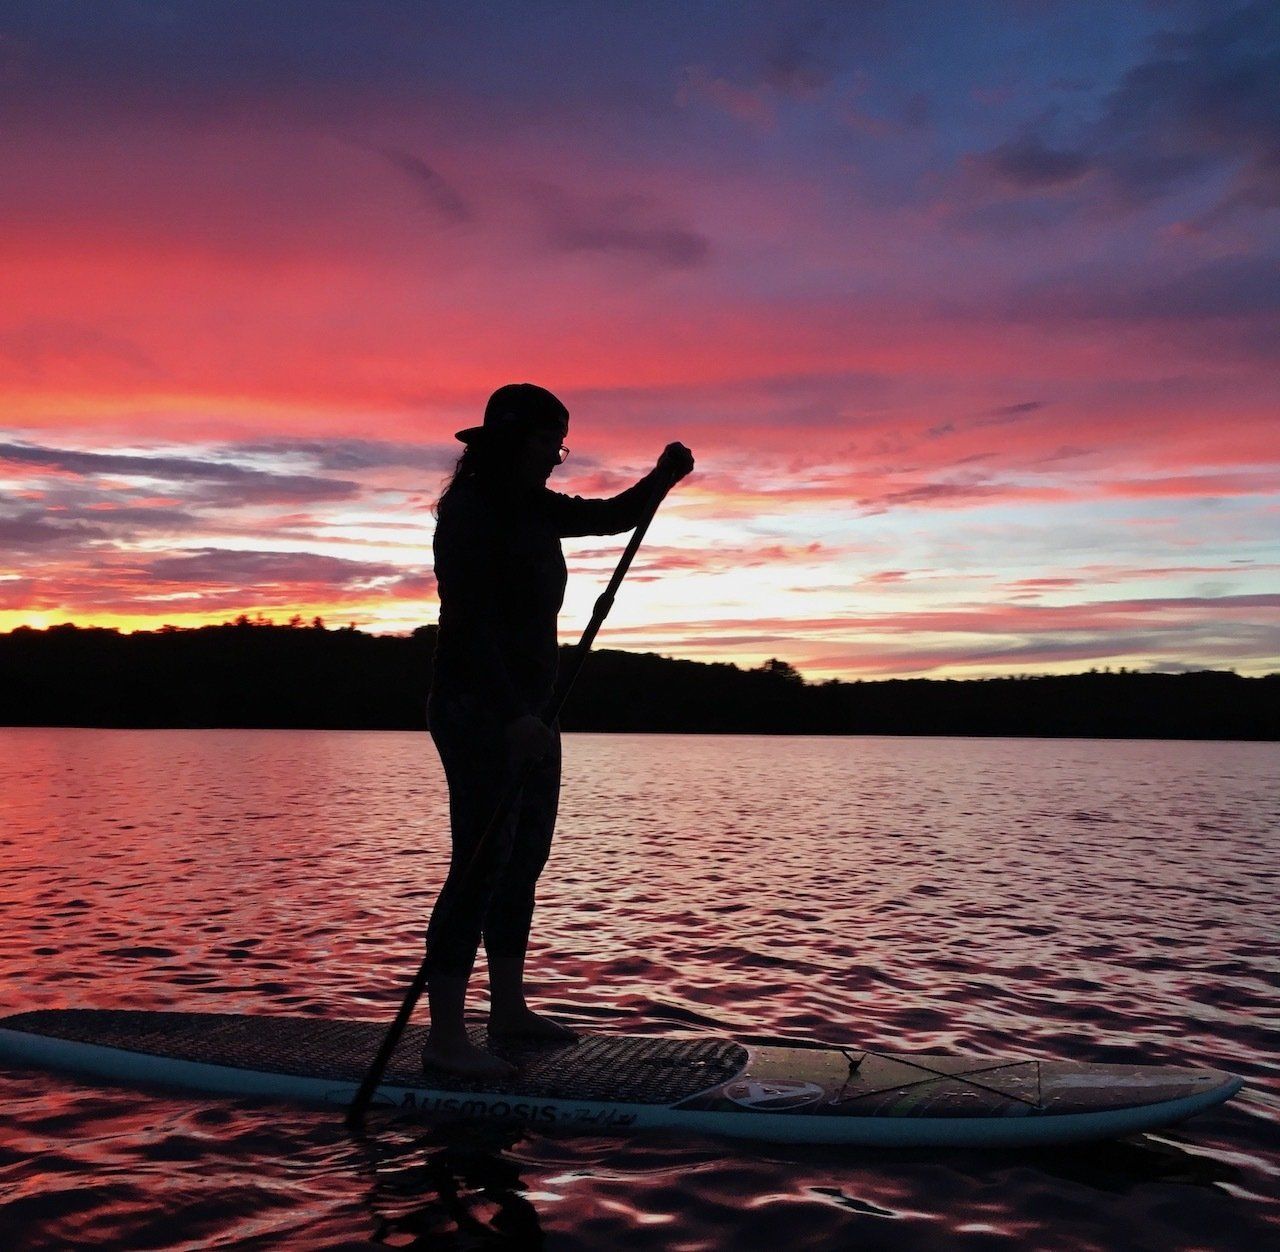 Paddle Boarding at The Waterside Restaurant at The Inn On The Loch Hotel Bar and Restaurant